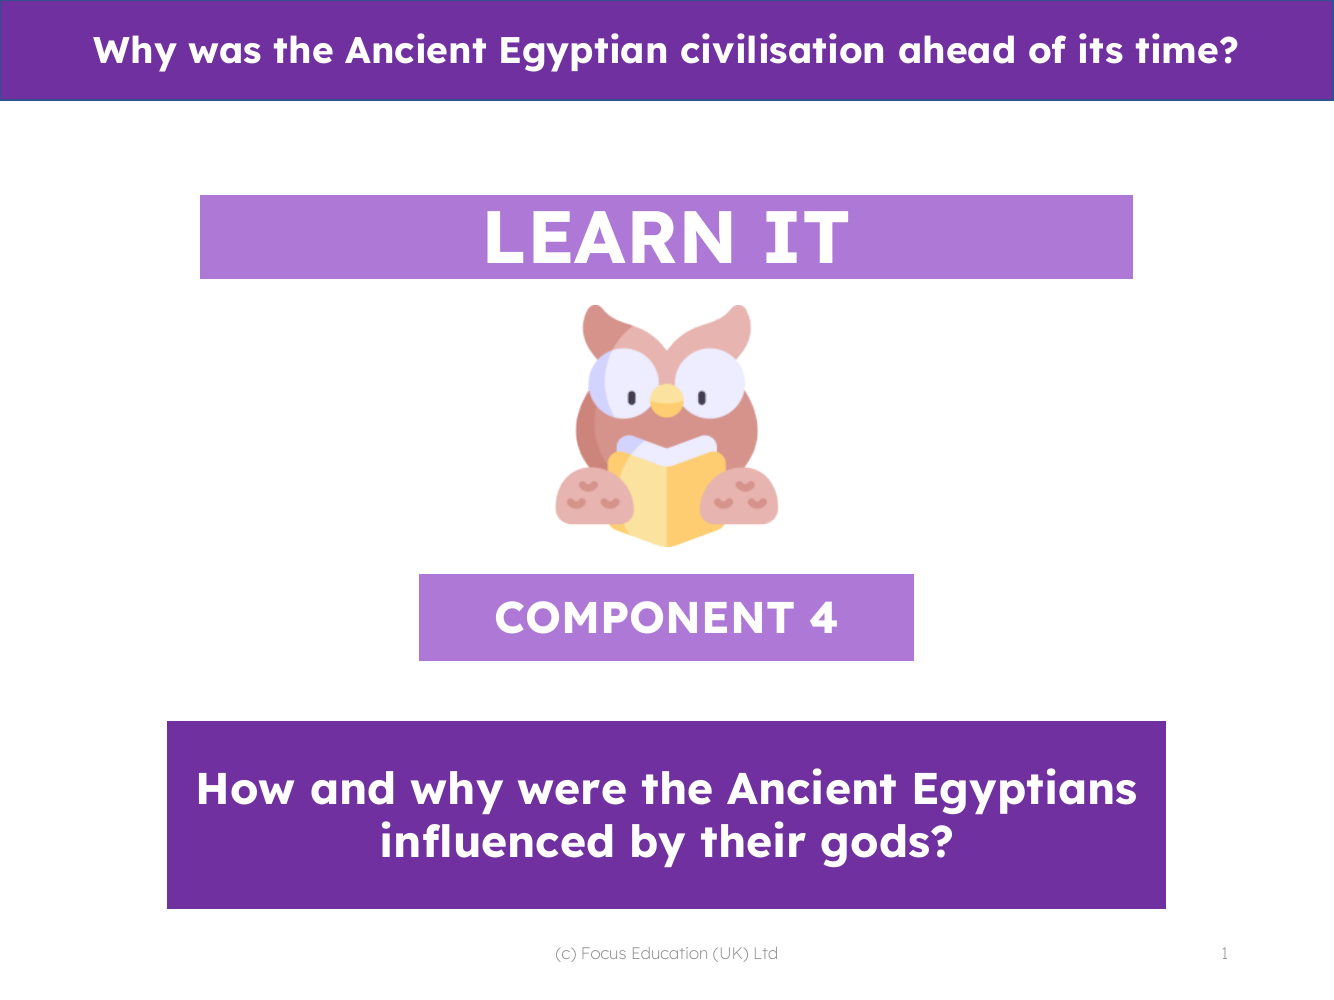 How and why were the Ancient Egyptians influenced by their gods? - Presentation